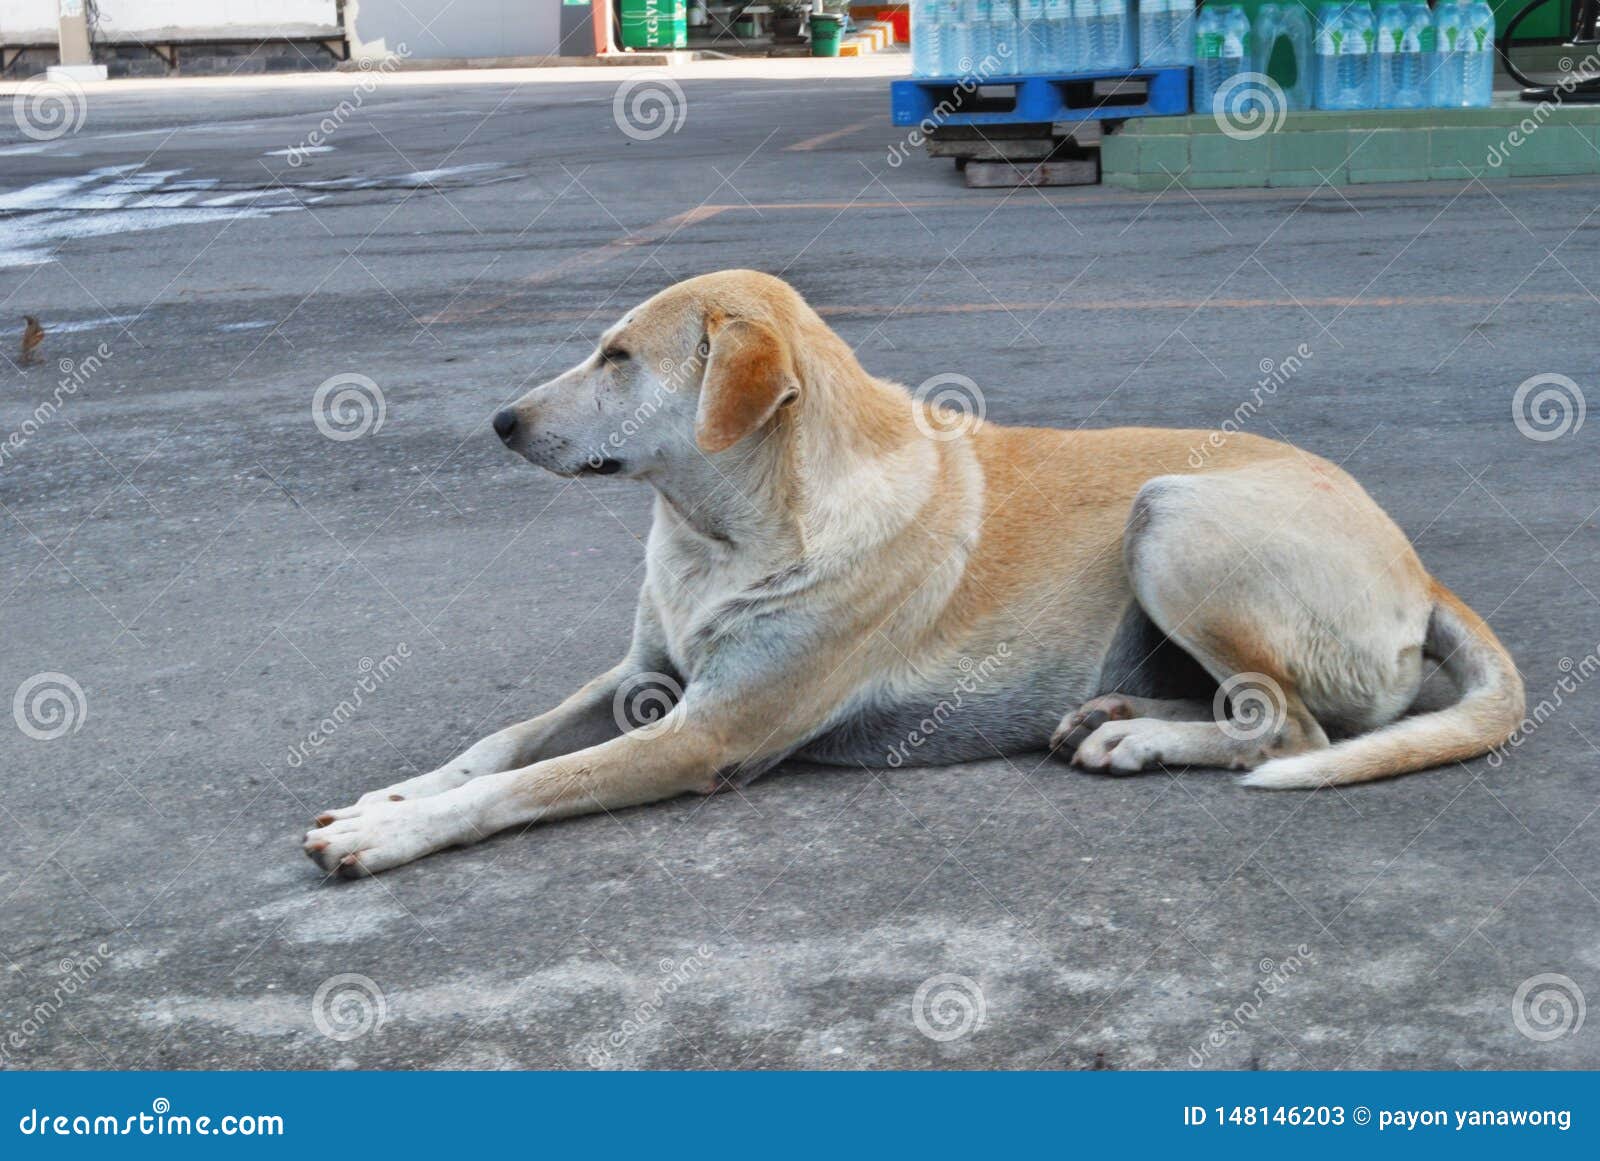 The Dog Lay Flat On The Floor Stock Image Image of cheerful, cute 148146203